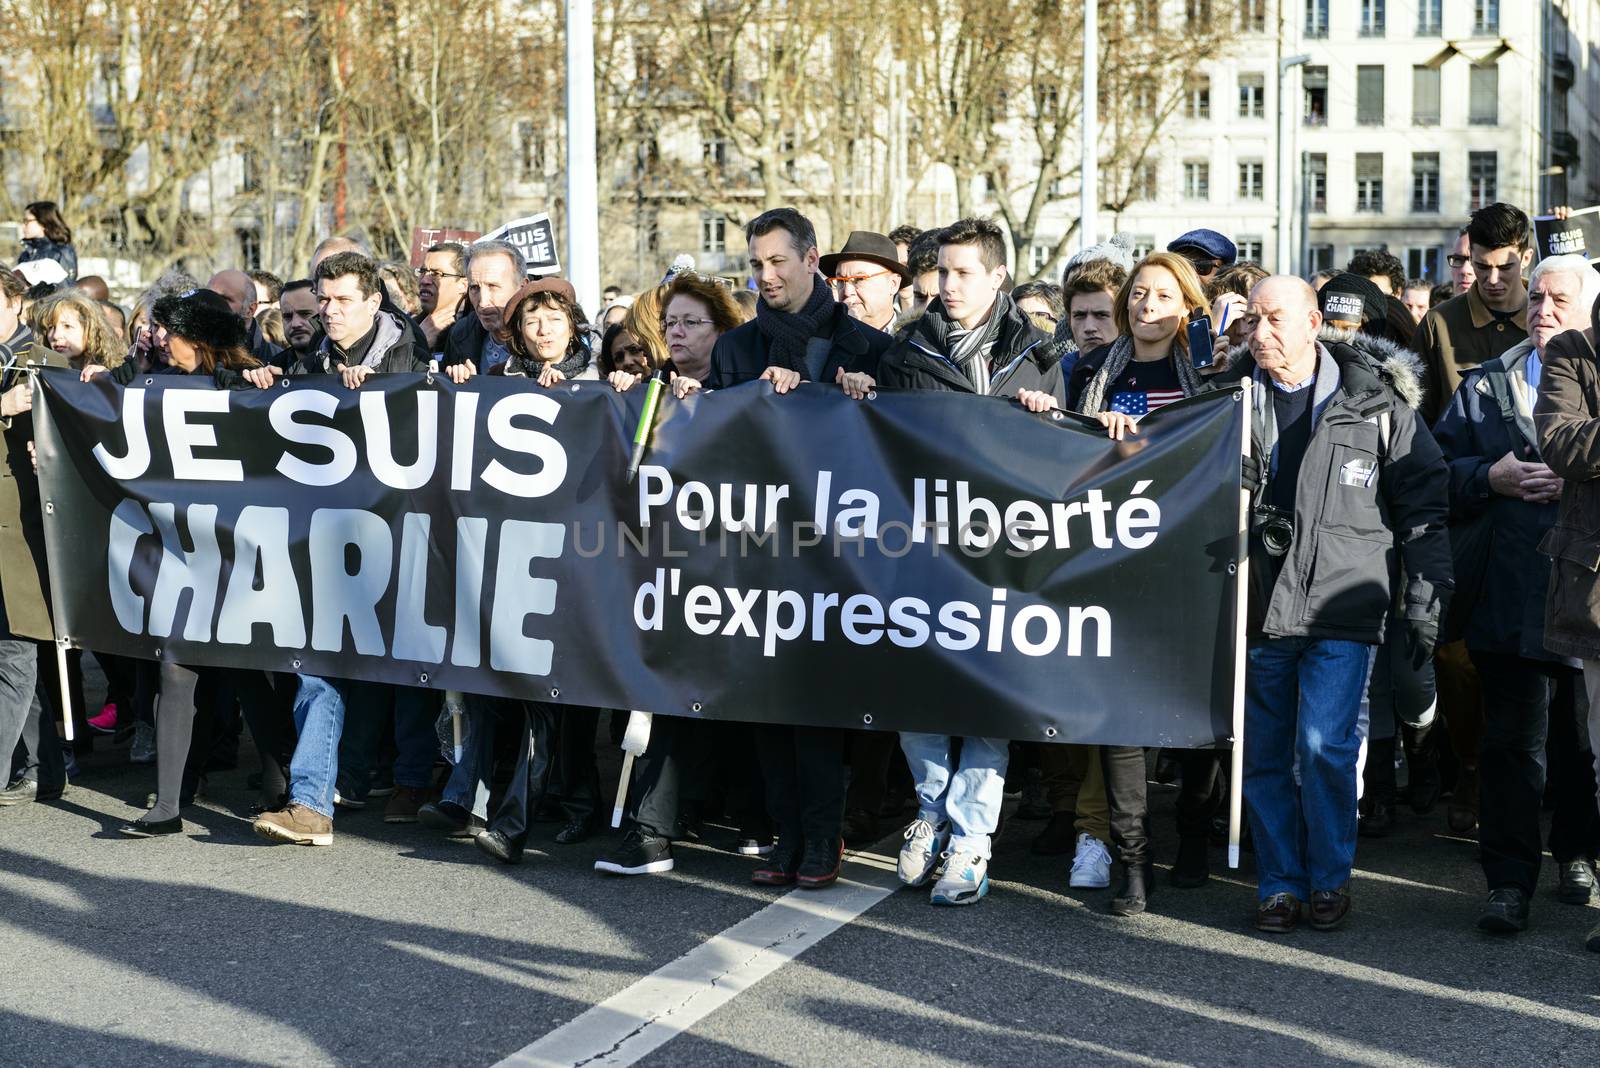 LYON, FRANCE - 11 JANUARY 2015: Anti terrorism protest after 3 days terrorist attacks with peaople dead in Paris France, European Capital